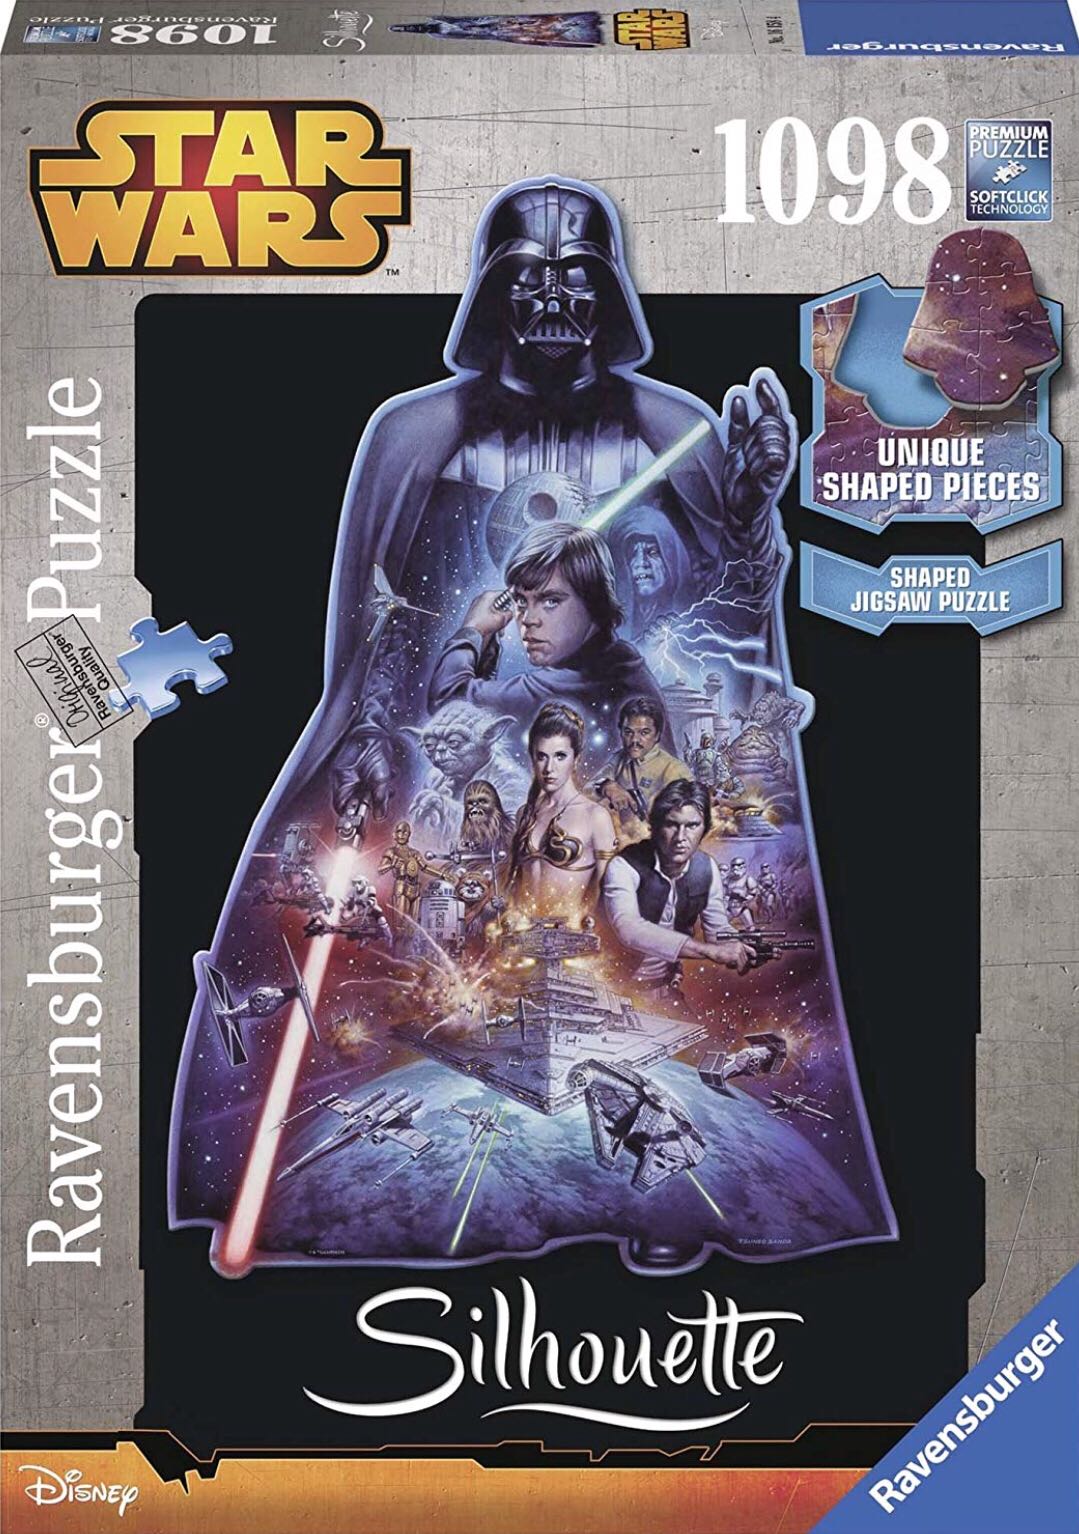 Star Wars Silhouette - Ravensburger puzzle collectible [Barcode 4005556161584] - Main Image 1